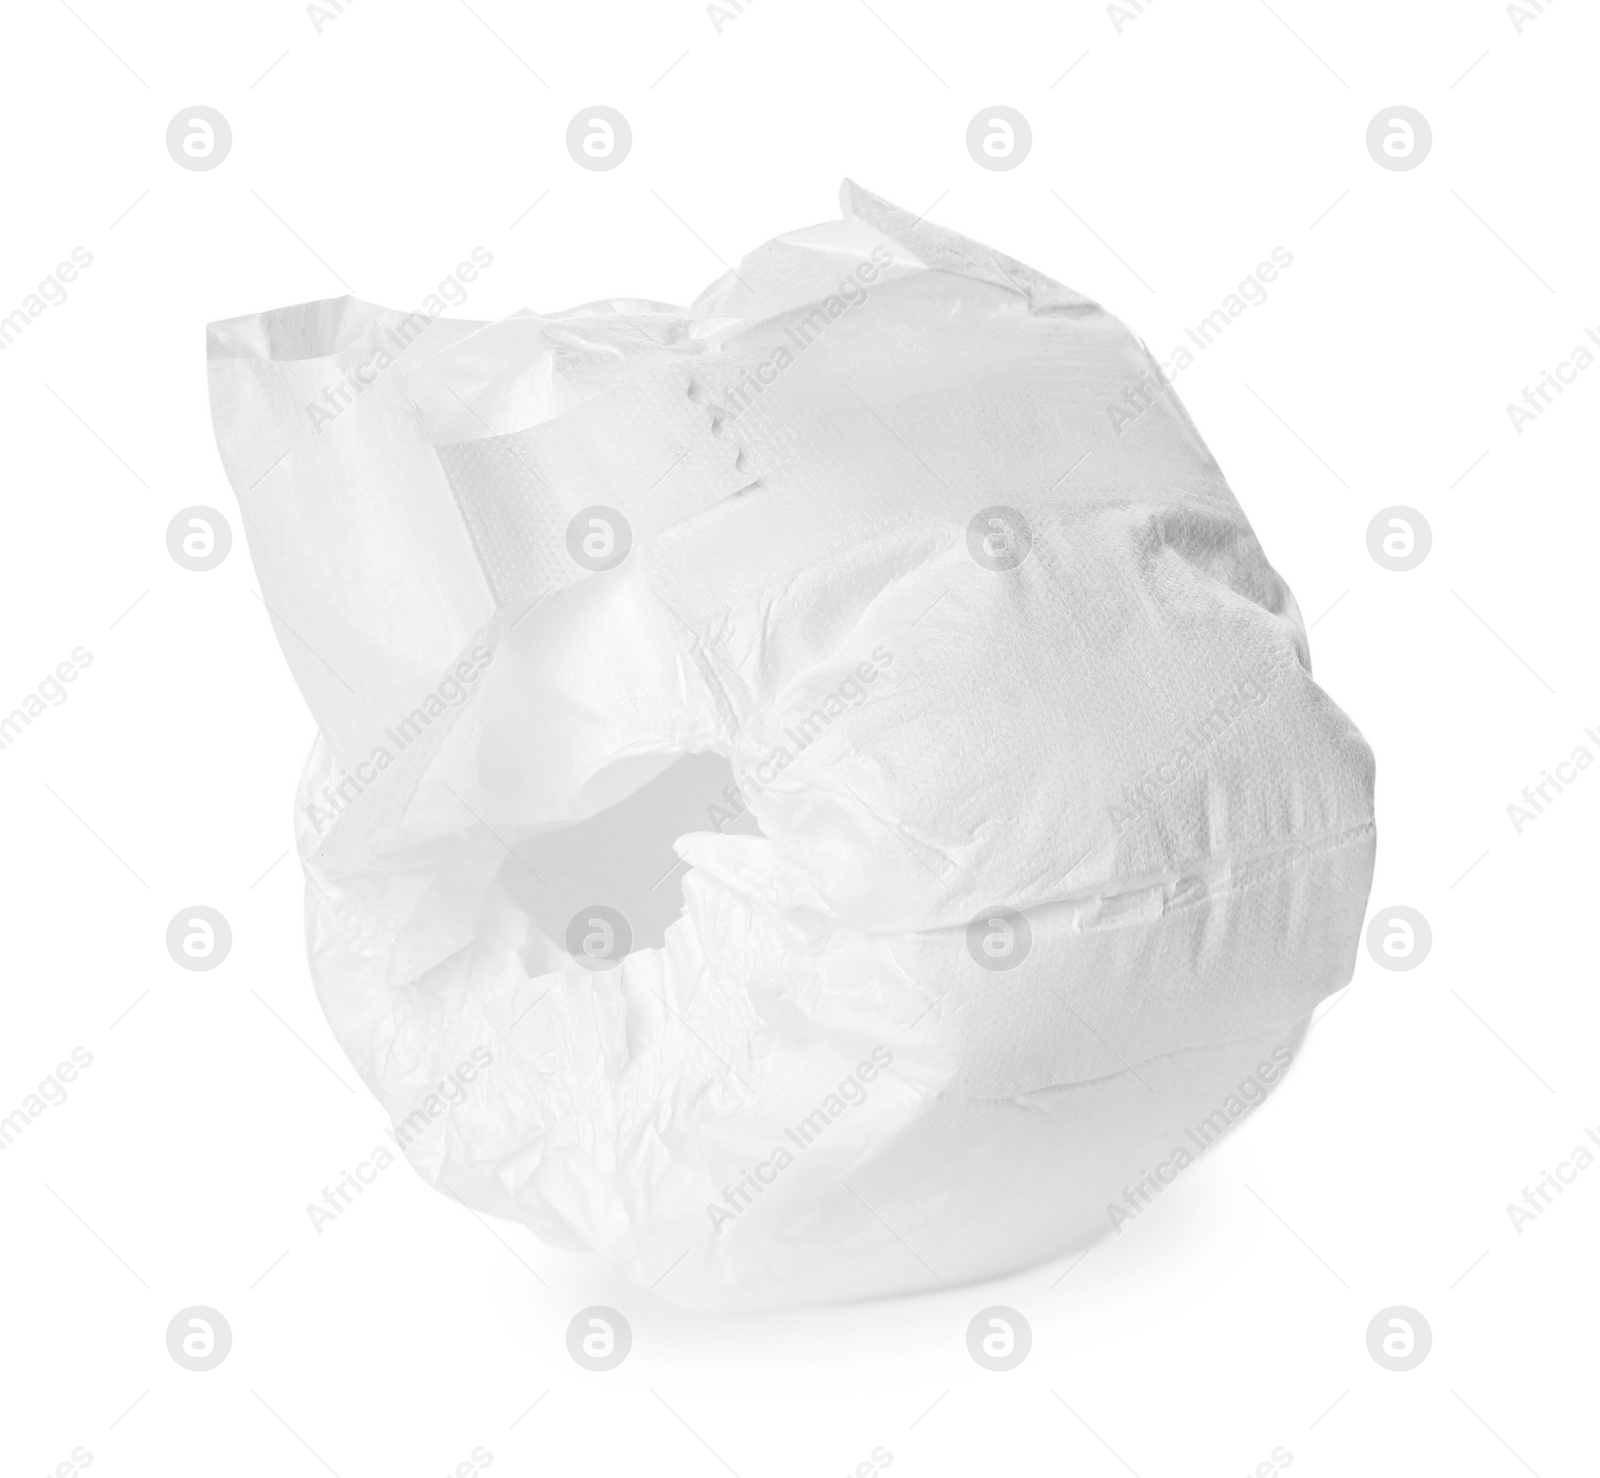 Photo of Single disposable baby diaper isolated on white